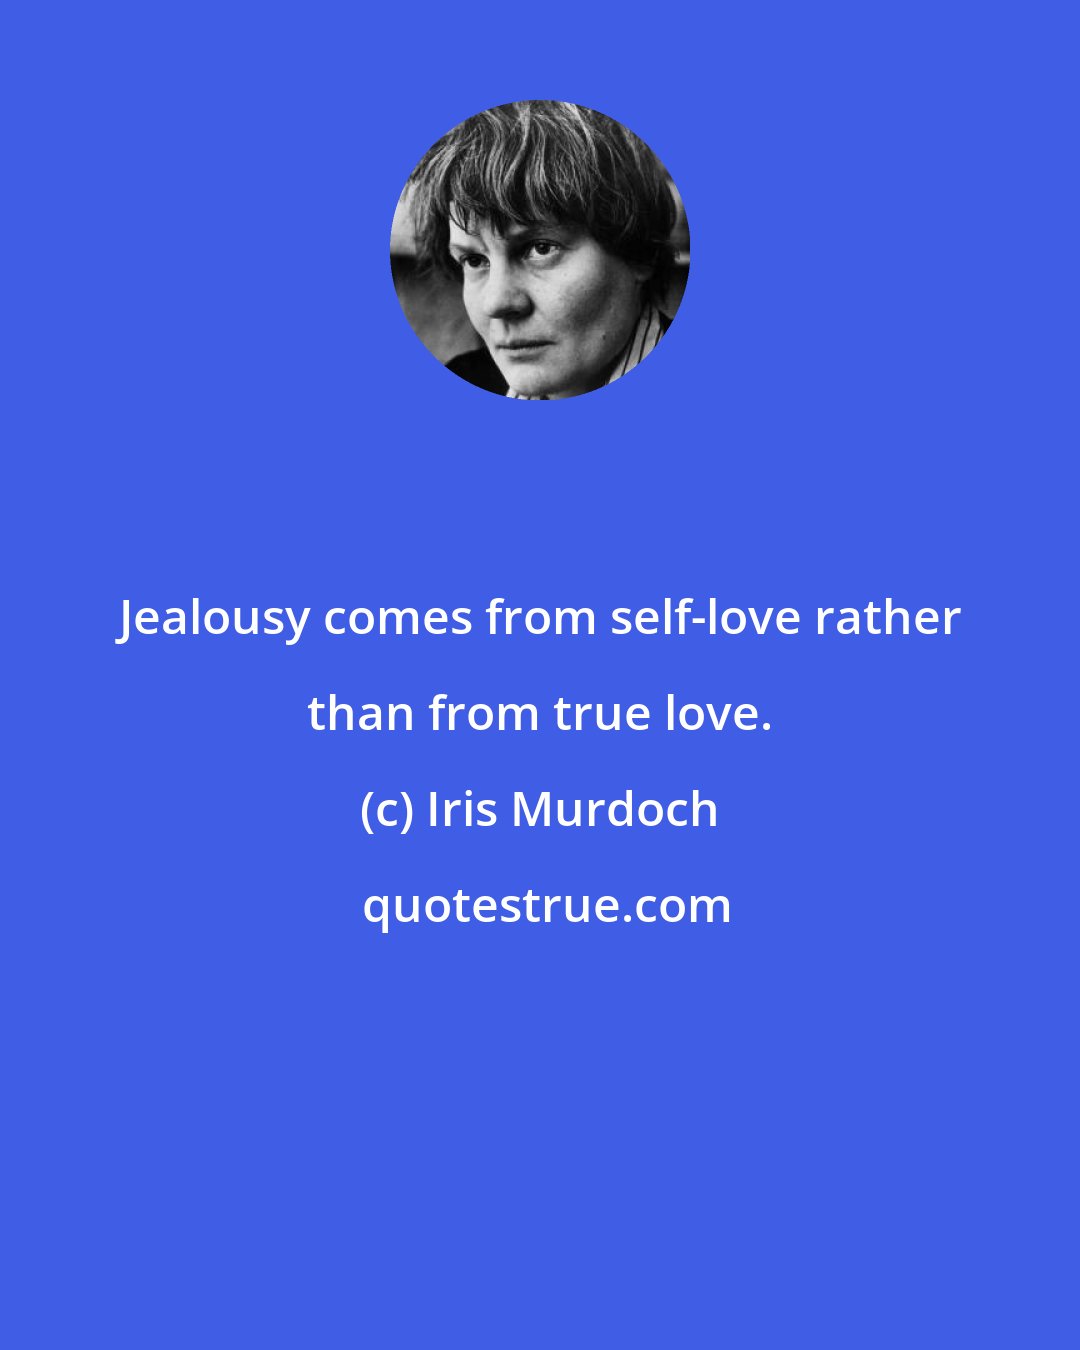 Iris Murdoch: Jealousy comes from self-love rather than from true love.